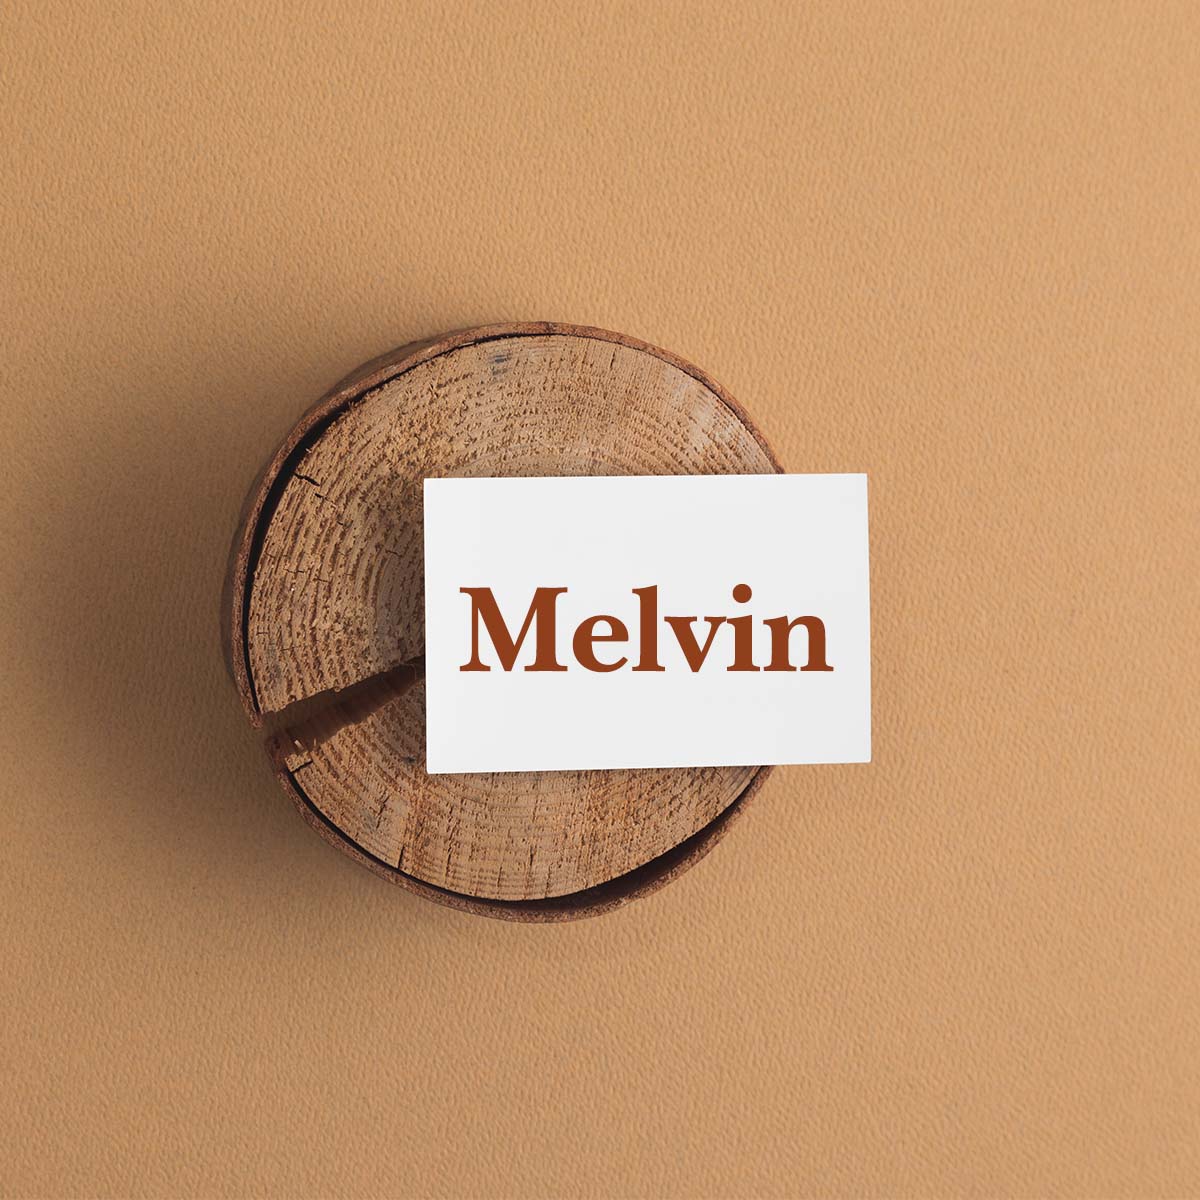 National Melvin Day